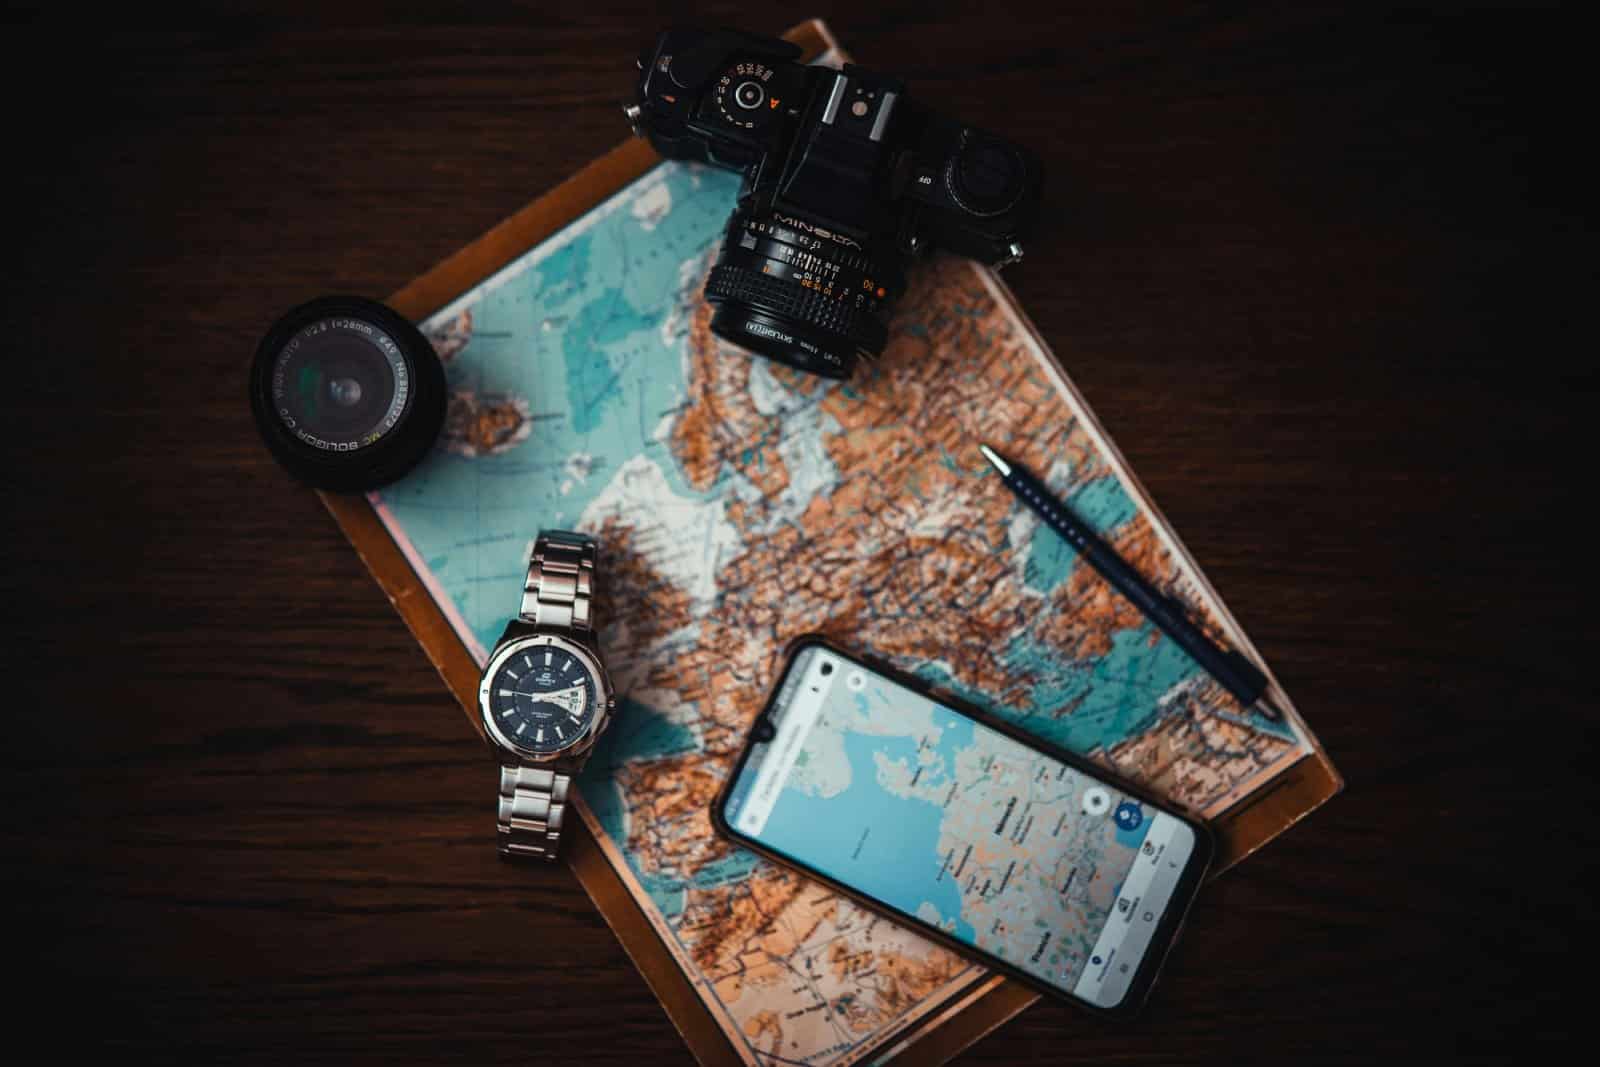 <p class="wp-caption-text">Image Credit: Pexels / Vojta Kova?ík</p>  <p>As your current journey comes to an end, start planning for future adventures together. Keep the camaraderie alive by discussing potential destinations, activities, and dream trips that will keep your friendship thriving for years to come.</p>